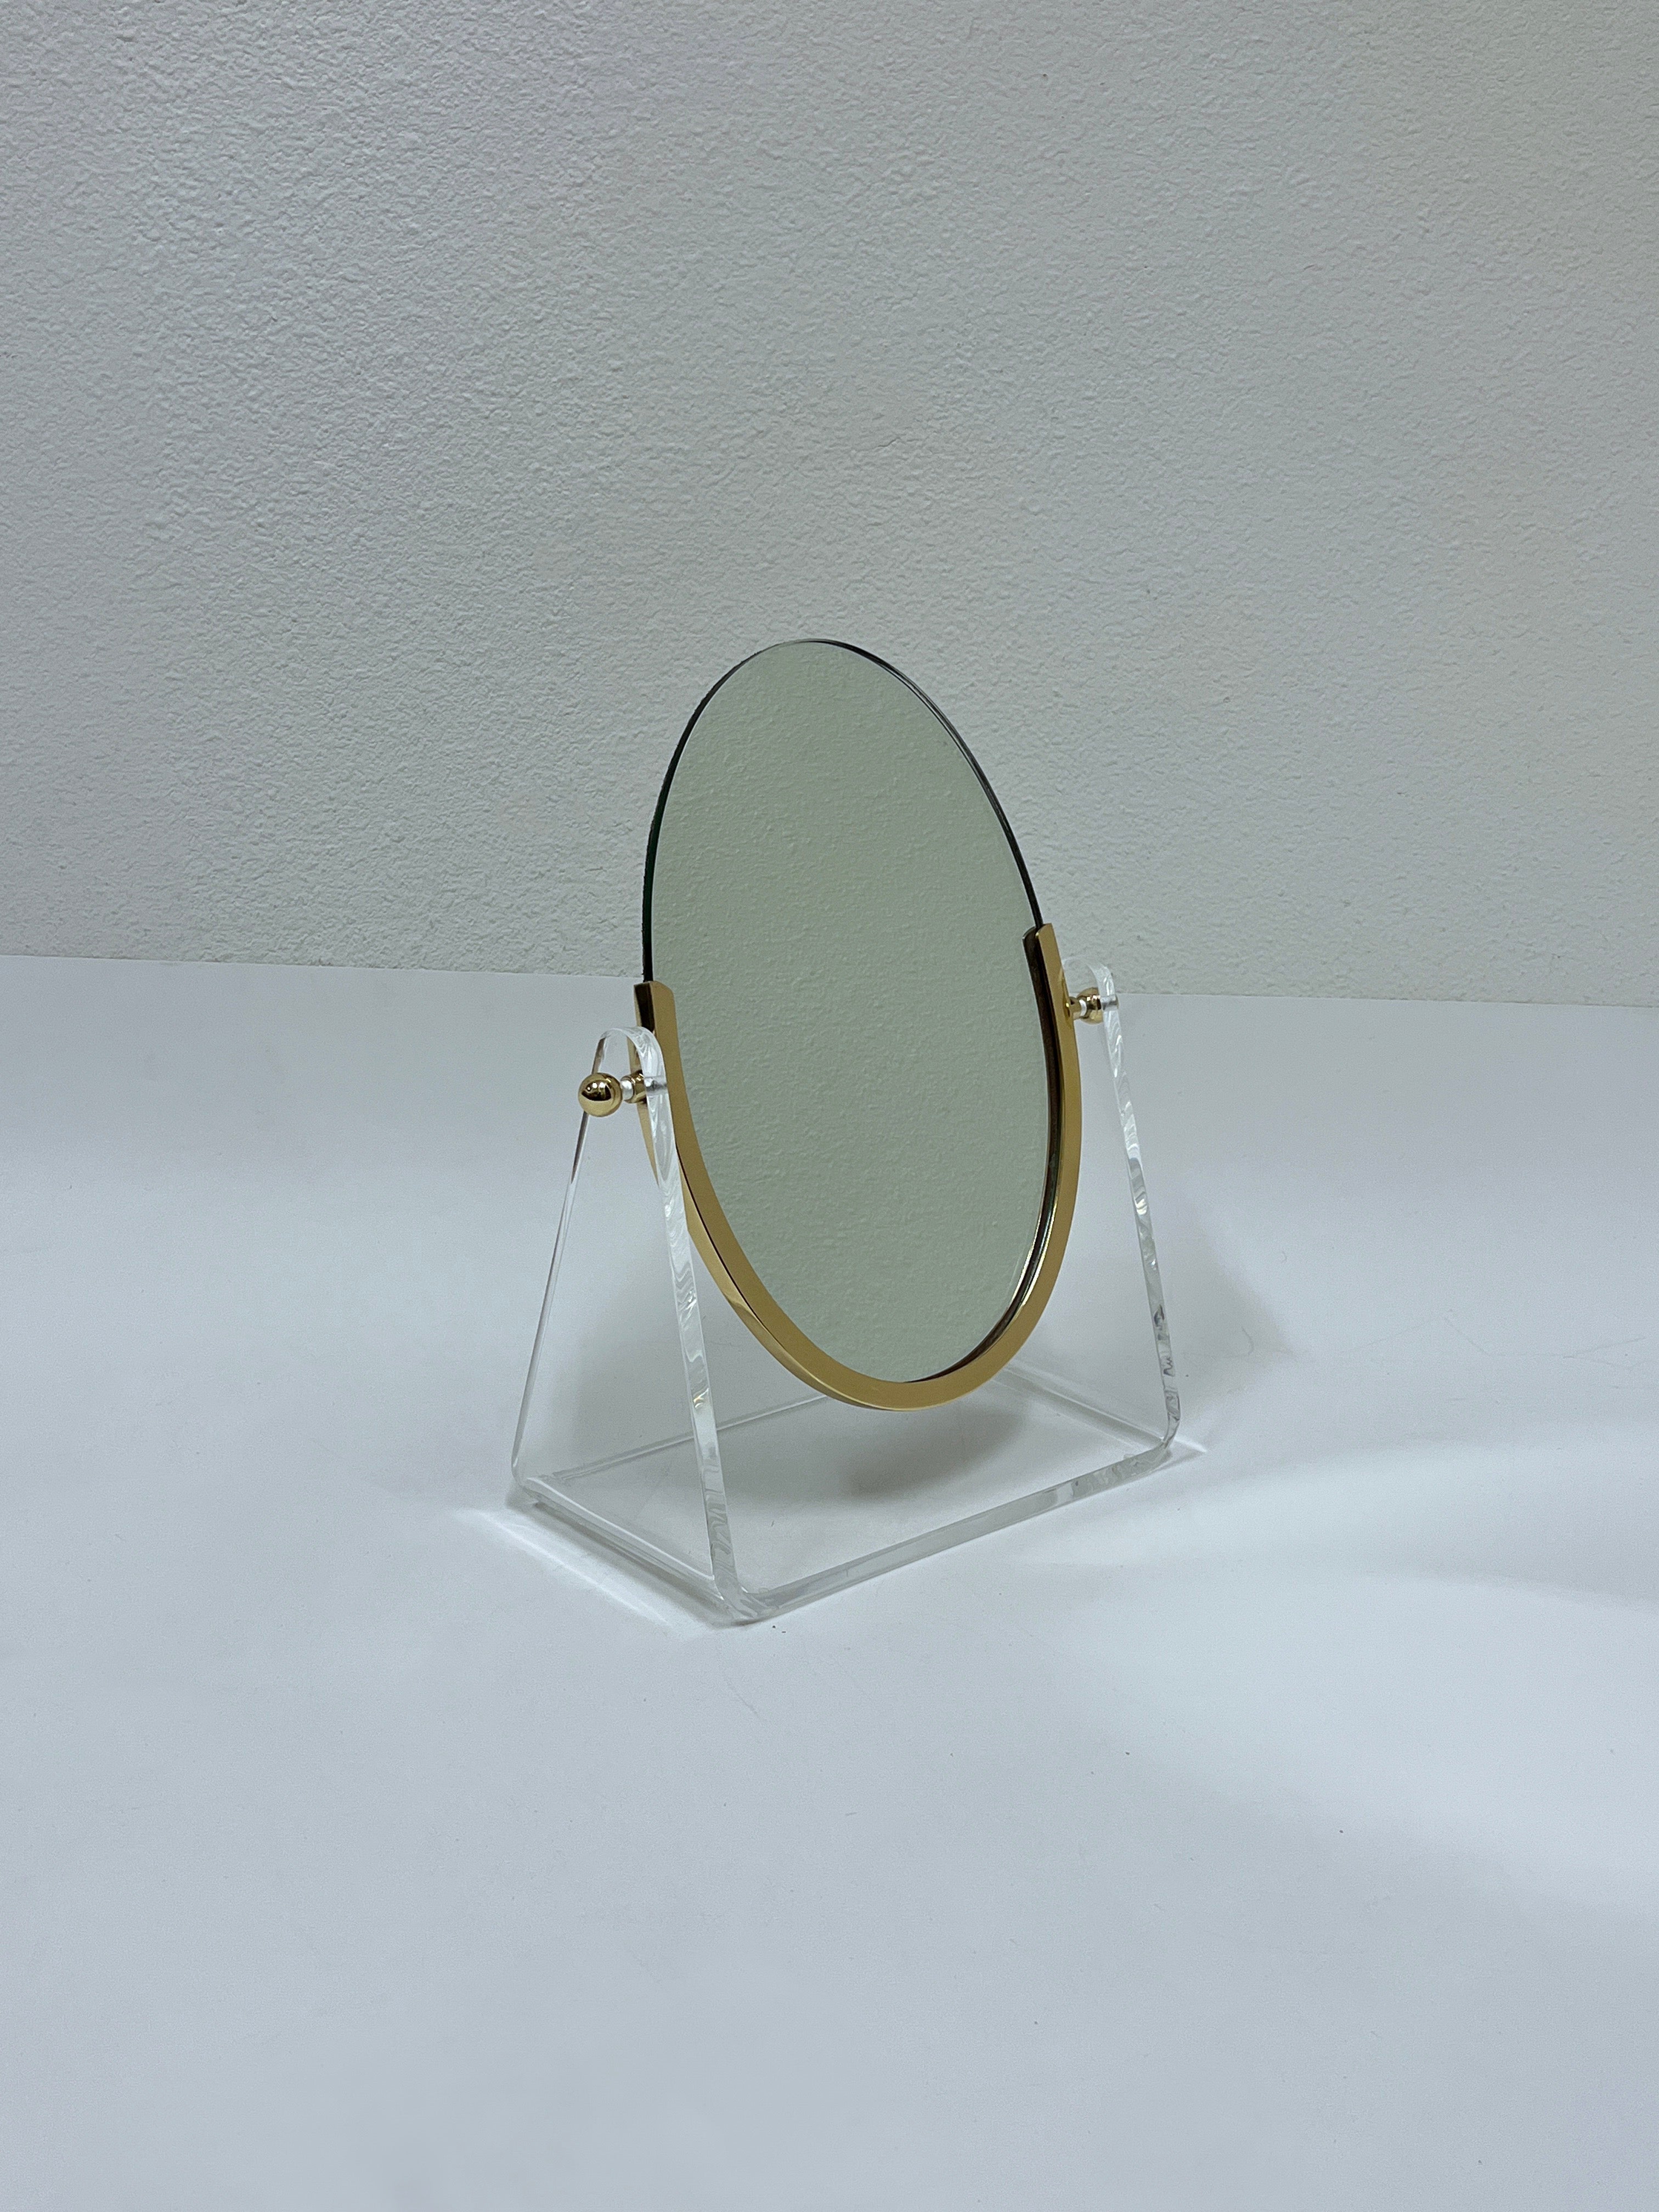 Glamorous 1970’s Lucite and polish brass vanity mirror by American renowned designer Charles Hollis Jones. 

Measurements: 13”wide, 6.25” deep and 16” high.